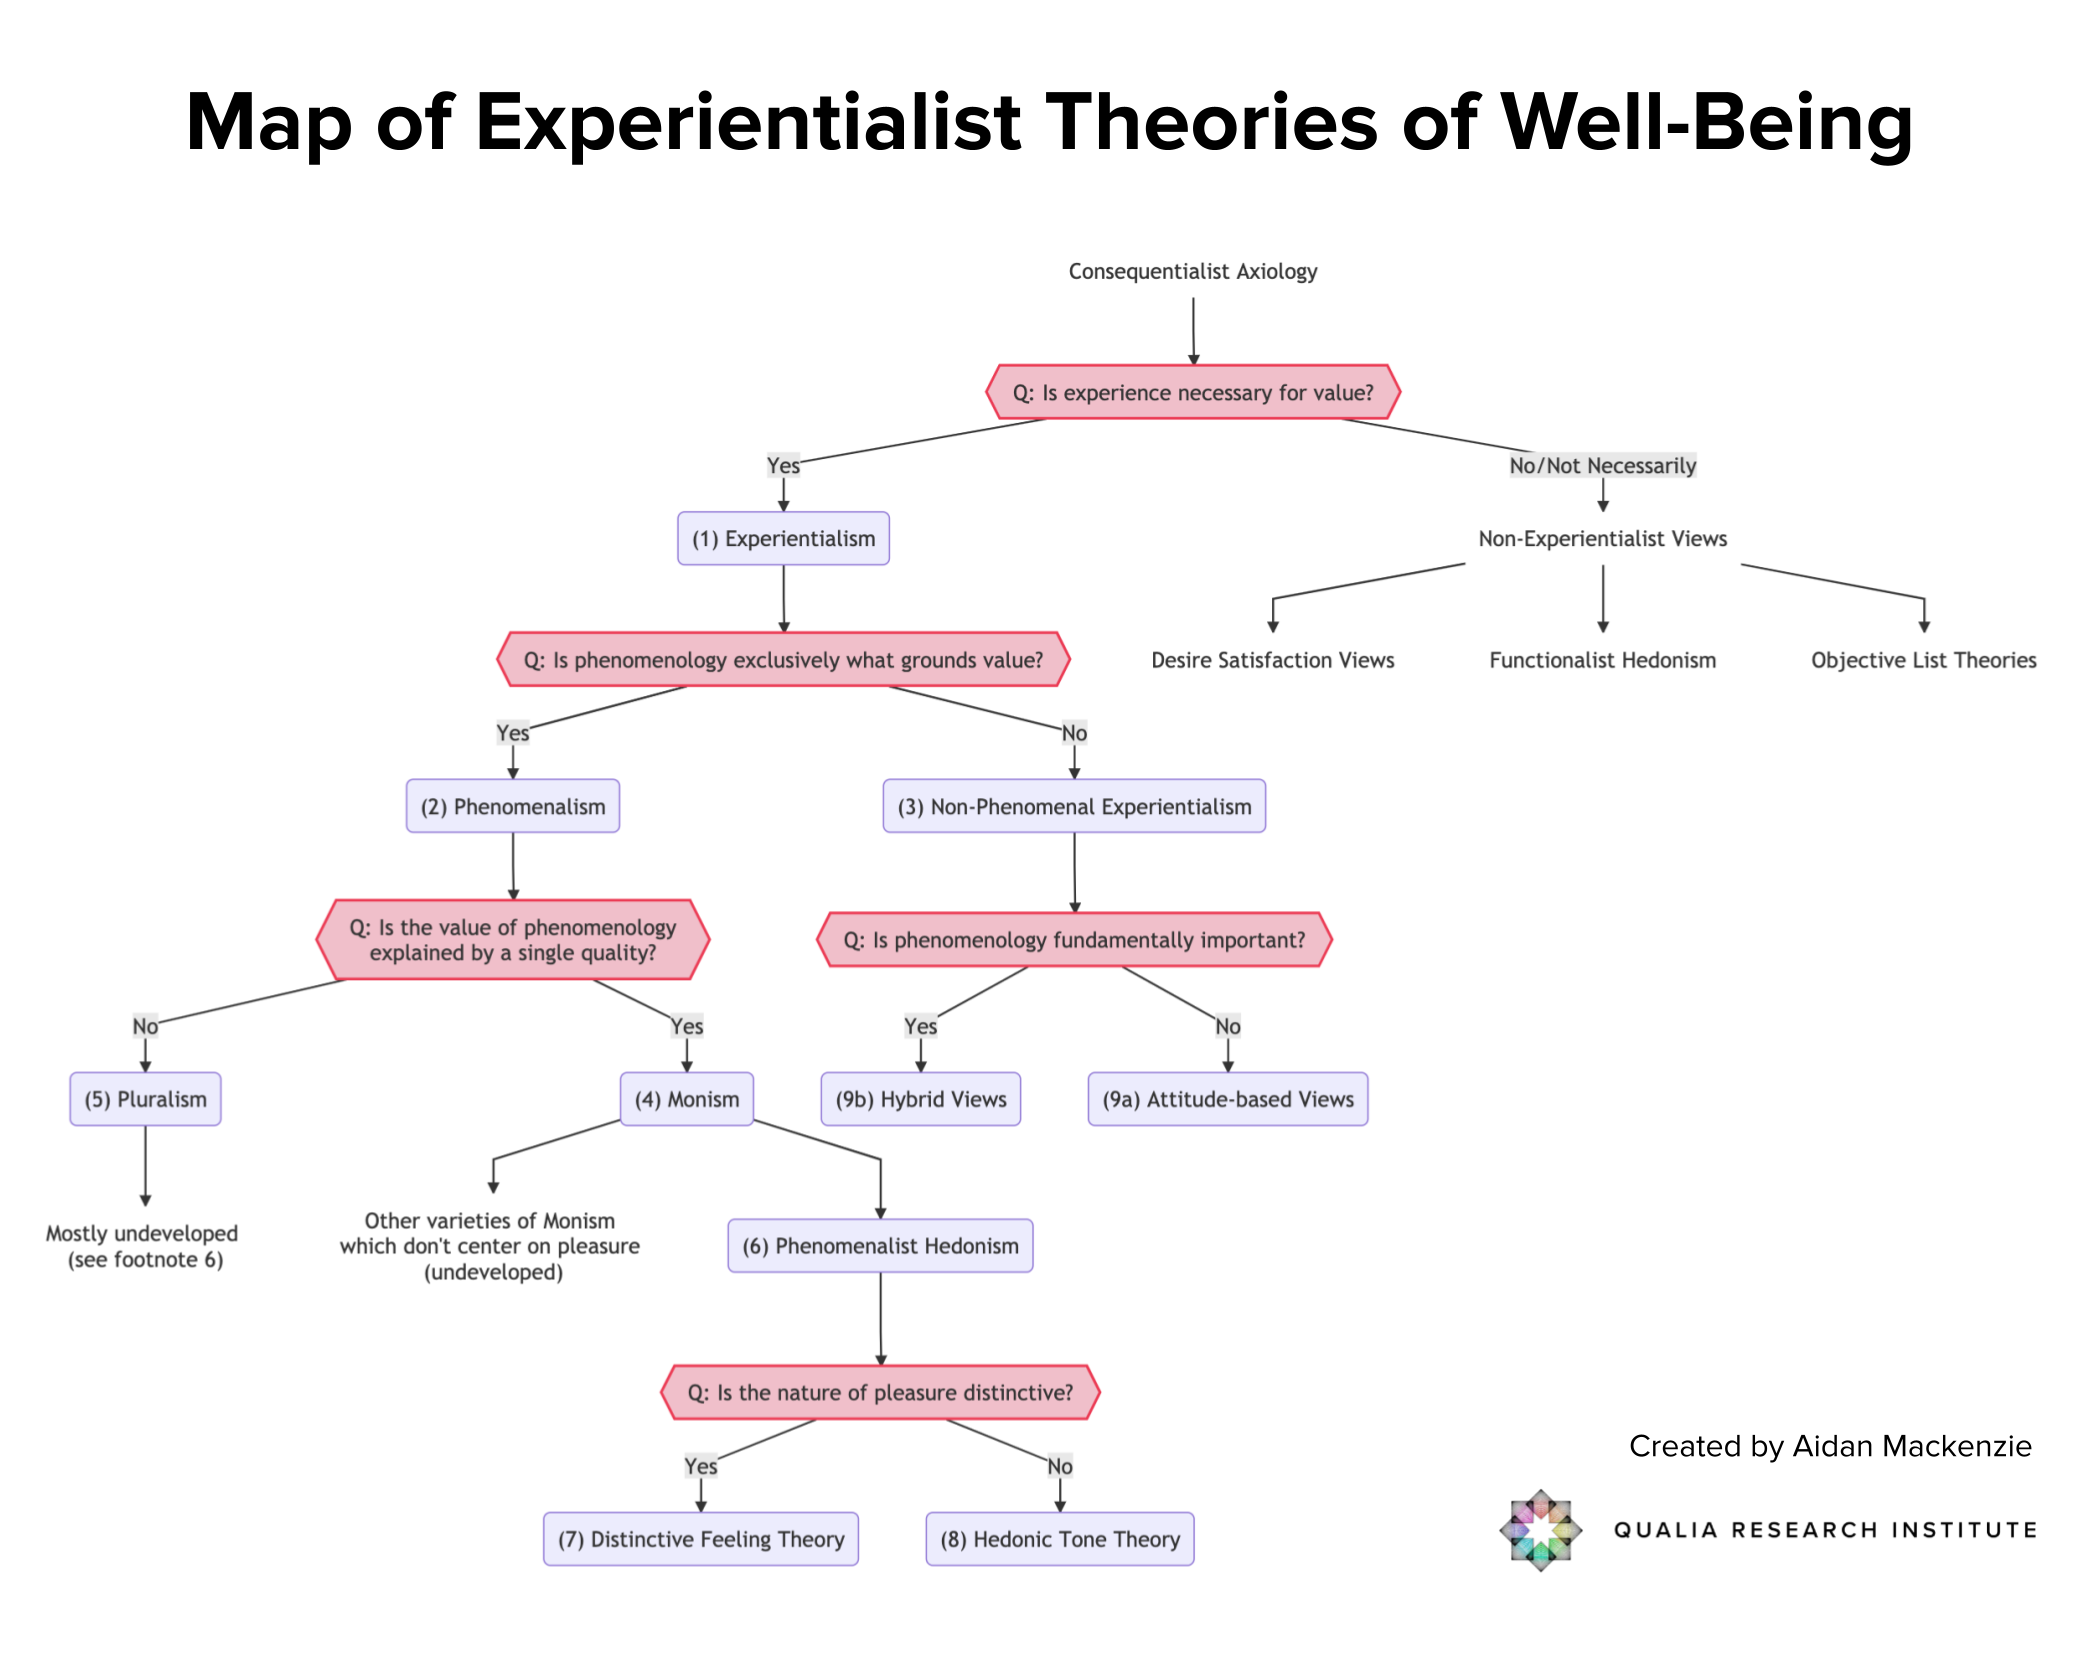 Map of Experientialist Theories of Well-Being